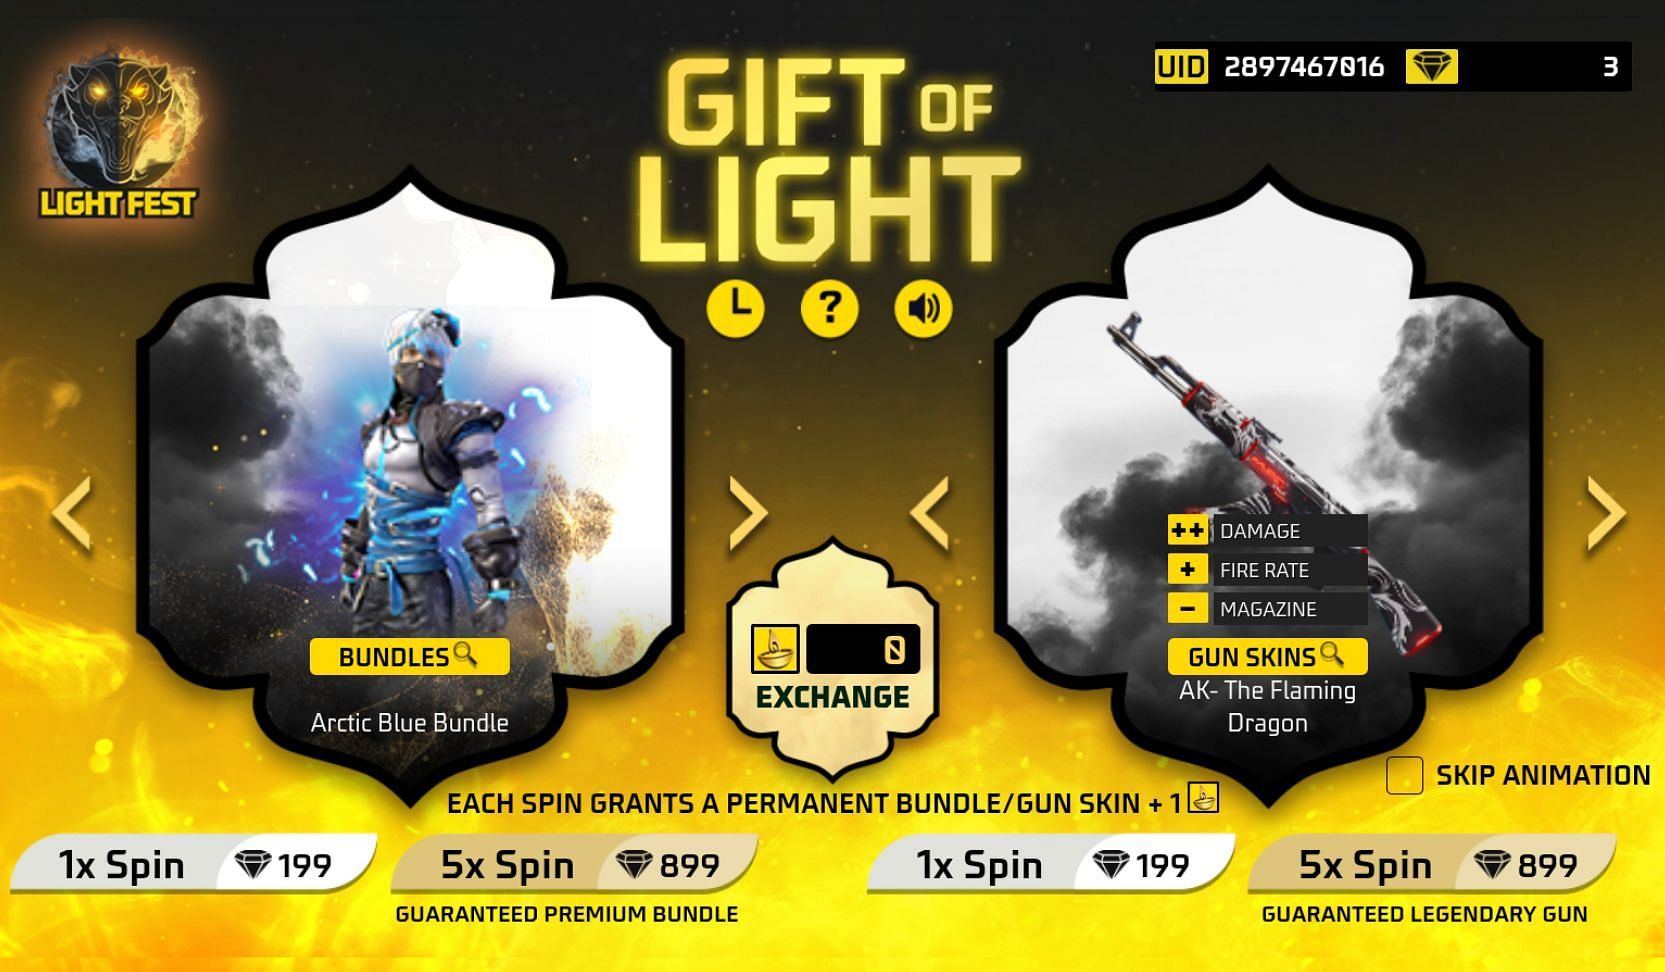 Artic Blue Bundle is one of the premium items in the event (Image via Garena)